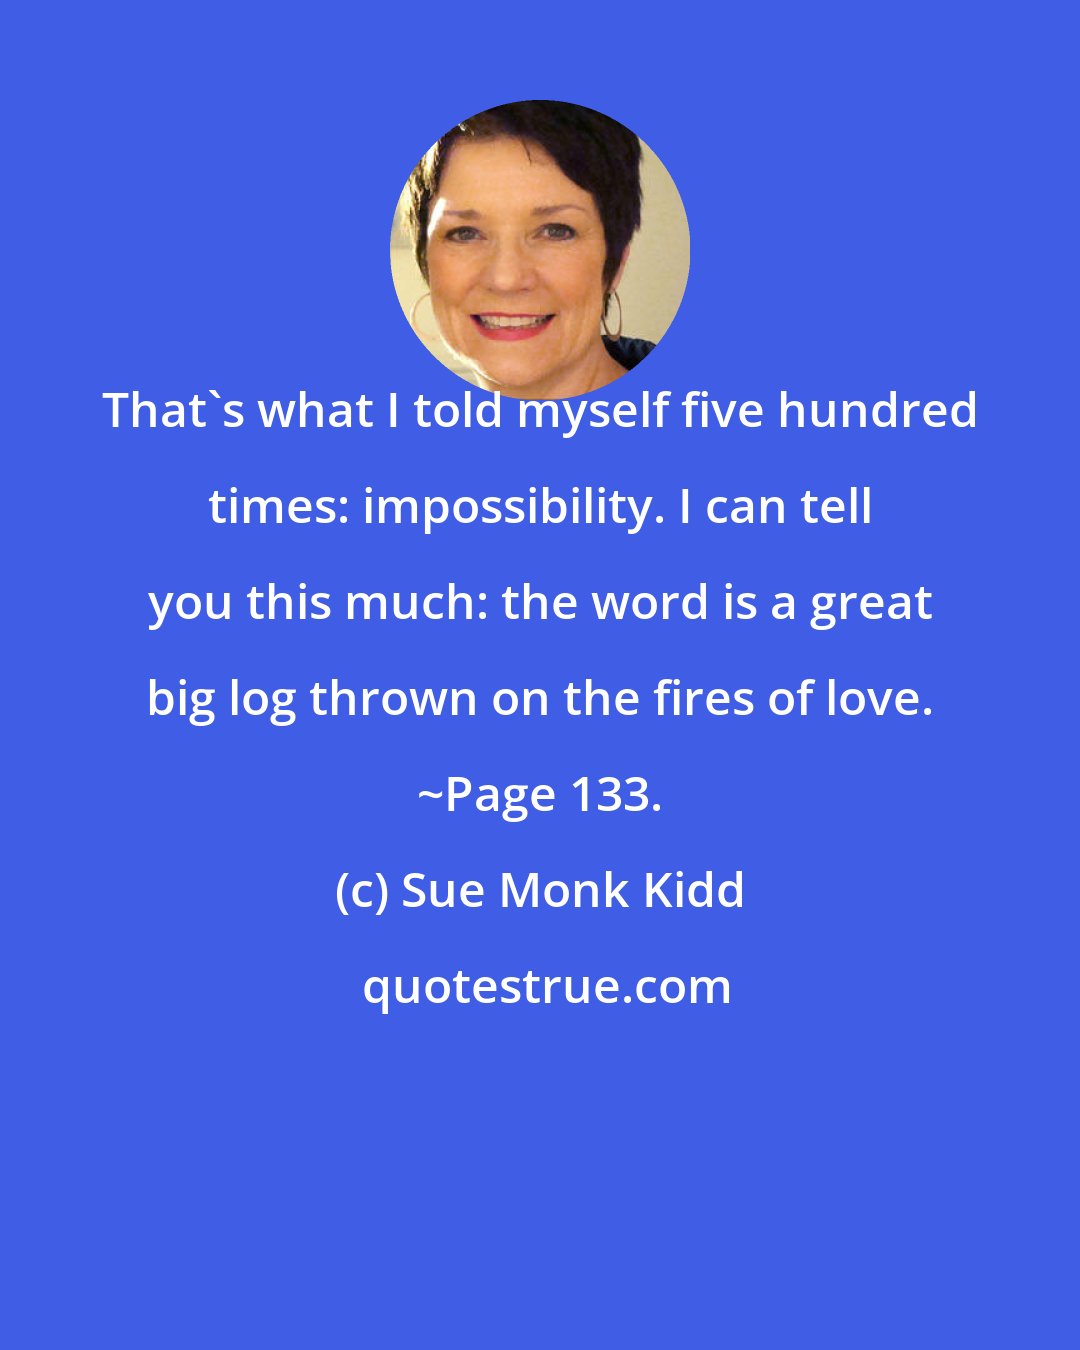 Sue Monk Kidd: That's what I told myself five hundred times: impossibility. I can tell you this much: the word is a great big log thrown on the fires of love. ~Page 133.